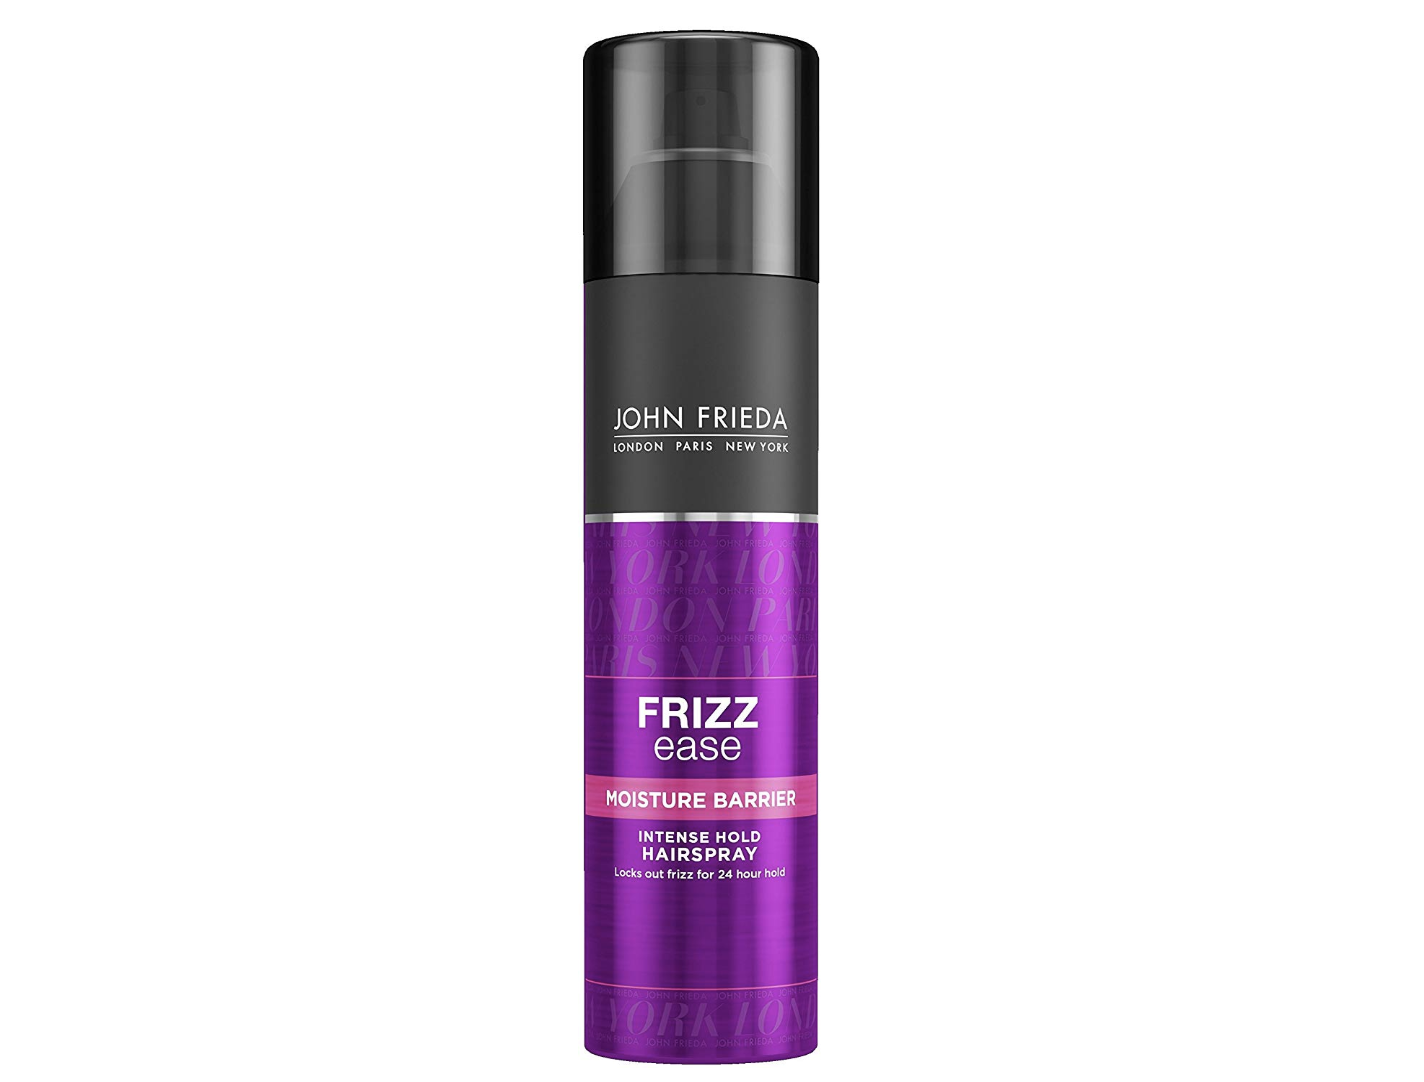 This stuff also works as a hairspray, so it'll hold your hairstyle in ...